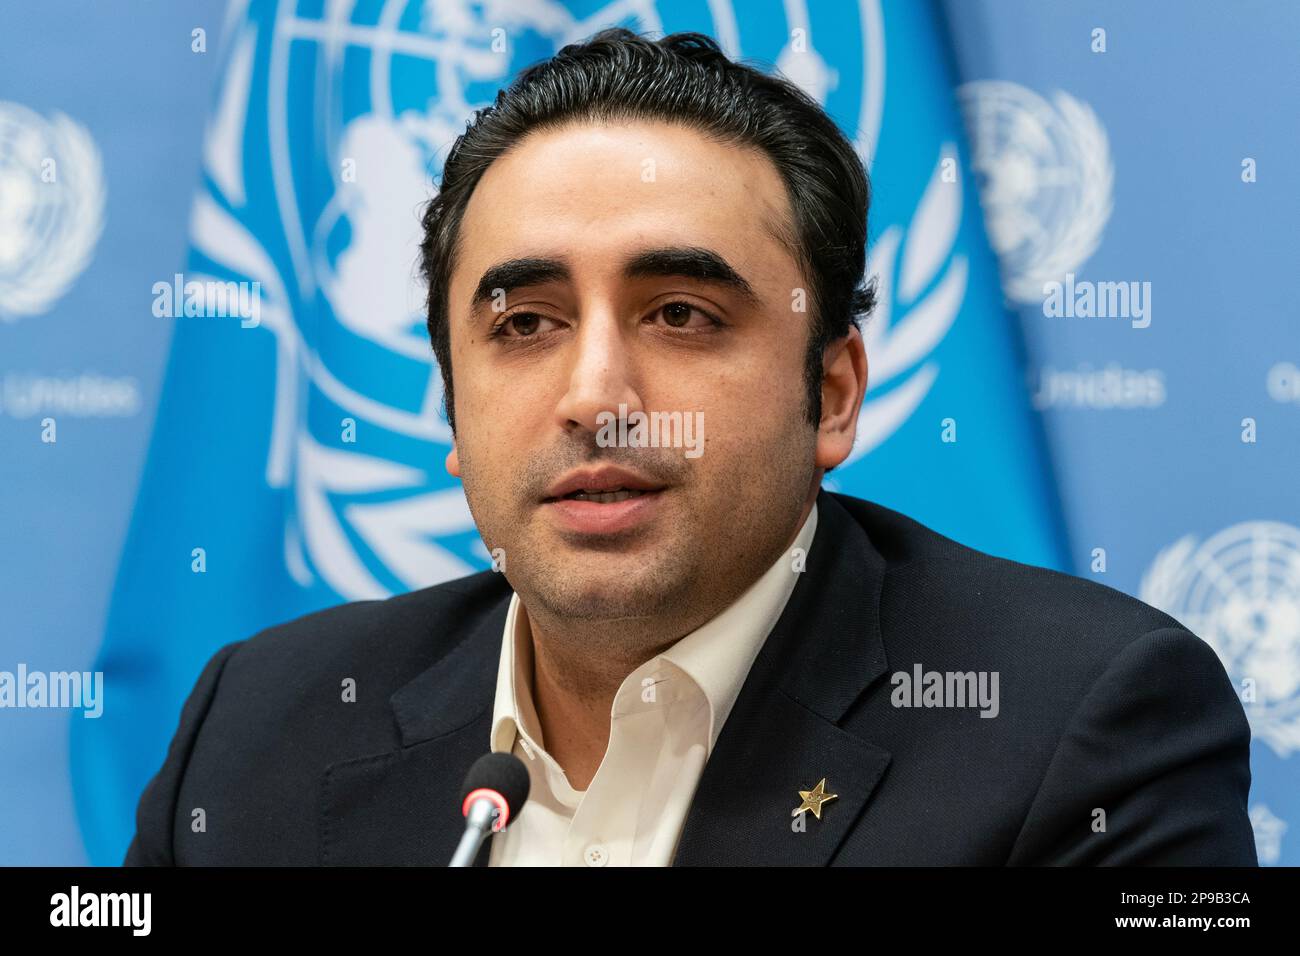 Press briefing by Minister for Foreign Affairs of the Islamic Republic of Pakistan Bilawal Bhutto Zardari at UN Headquarters in New York on March 10, 2023 Stock Photo